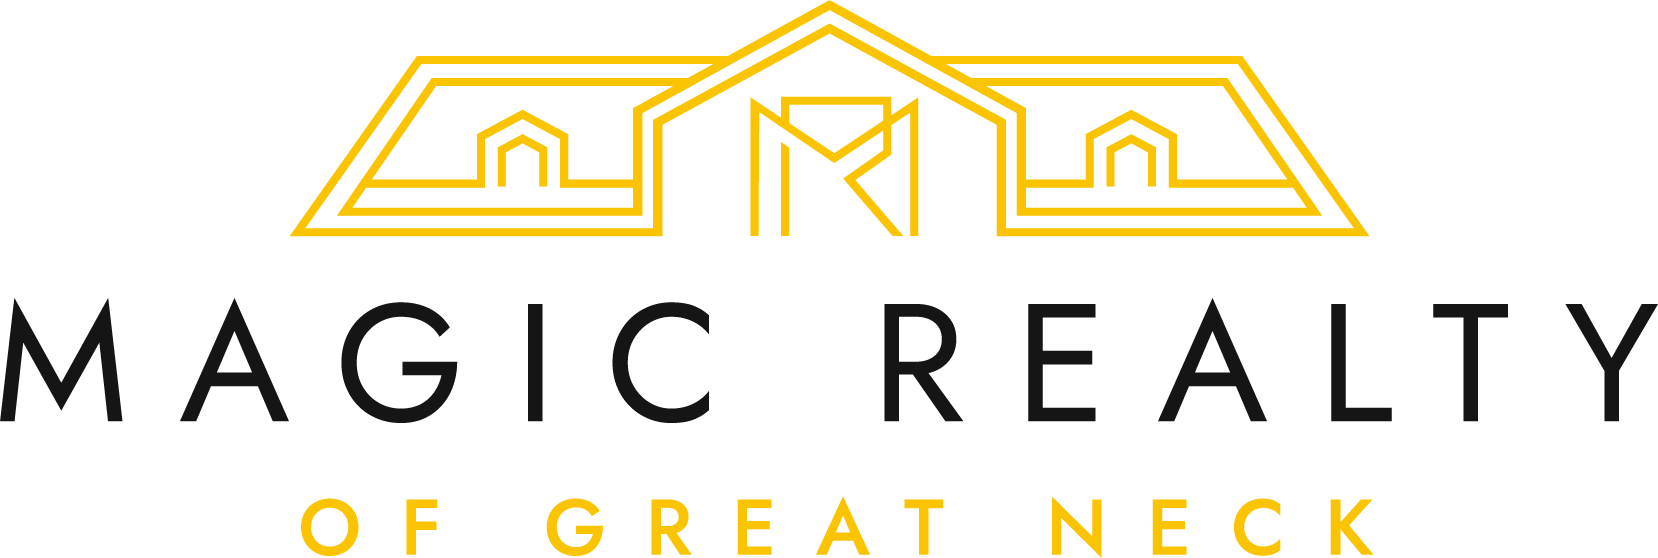 Magic Realty of Great Neck